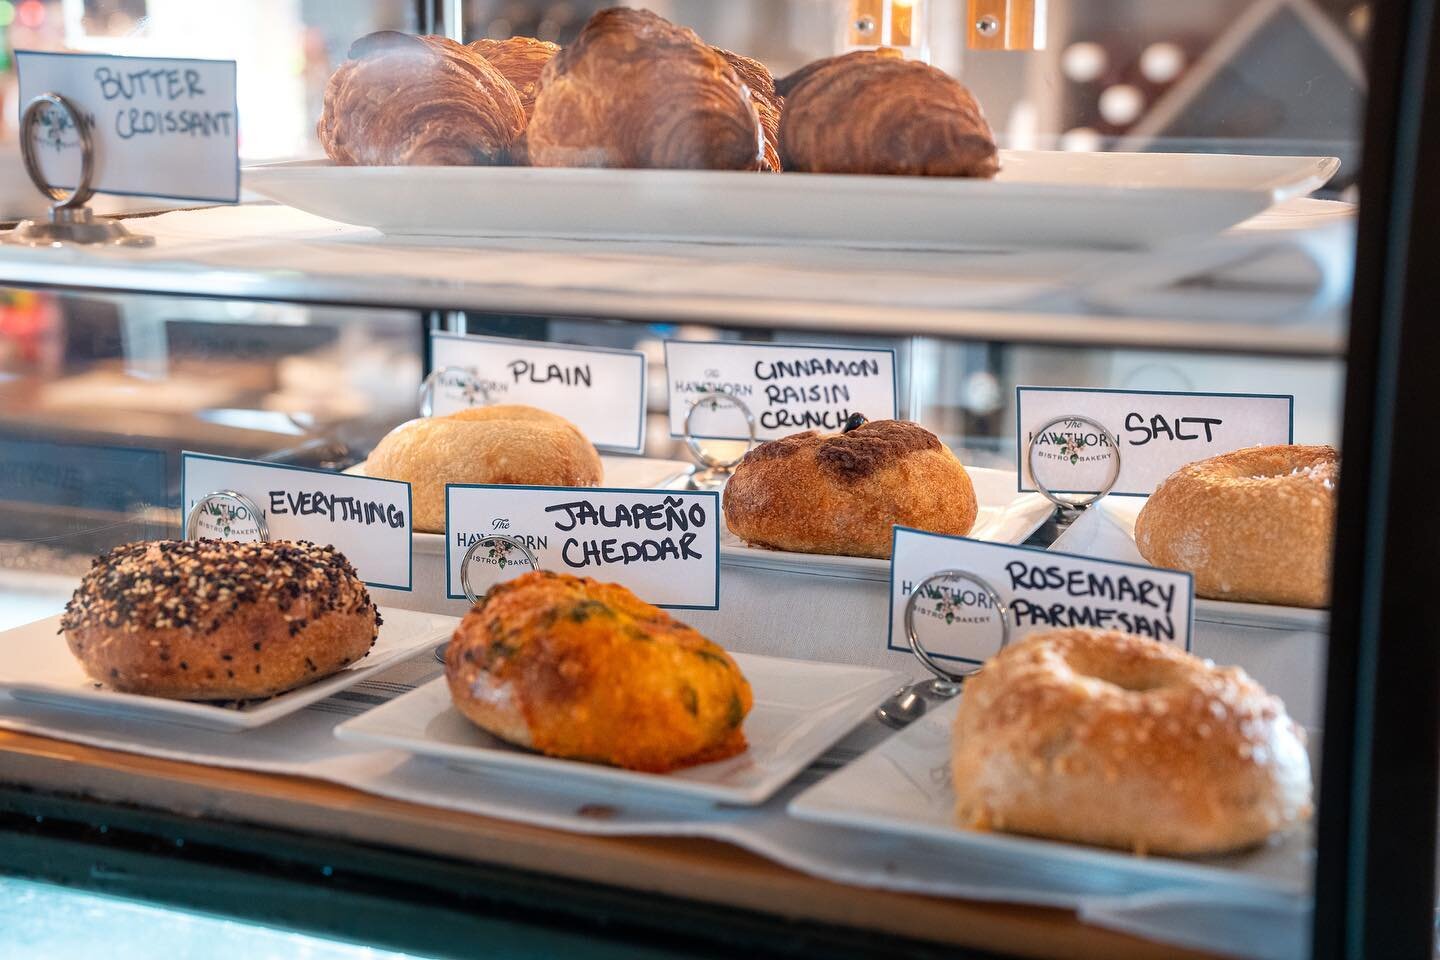 Bagels are available every Saturday morning! Make sure to grab yours quick, limited quantities and they&rsquo;ve been going fast!

Flavors Still Available Today:
&bull; Everything
&bull; Jalape&ntilde;o Cheddar
&bull; Cinnamon Raisin Crunch